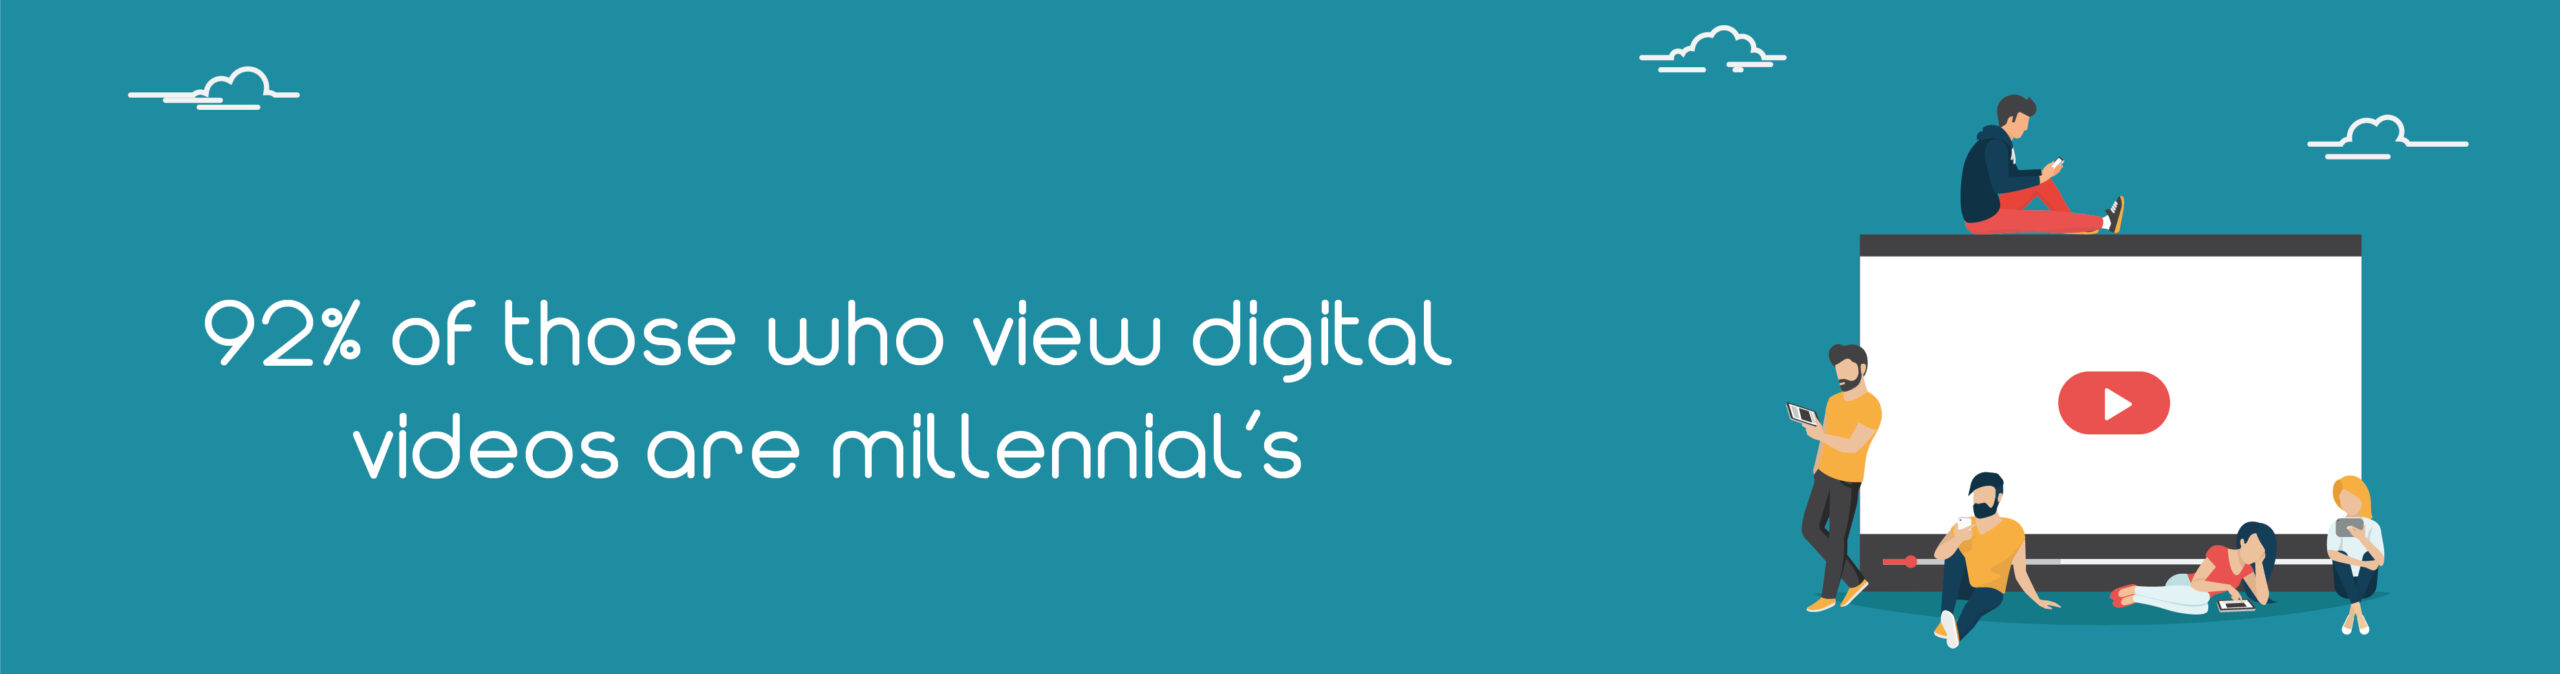 92% of those who view digital videos are millennials. - Business Motion.